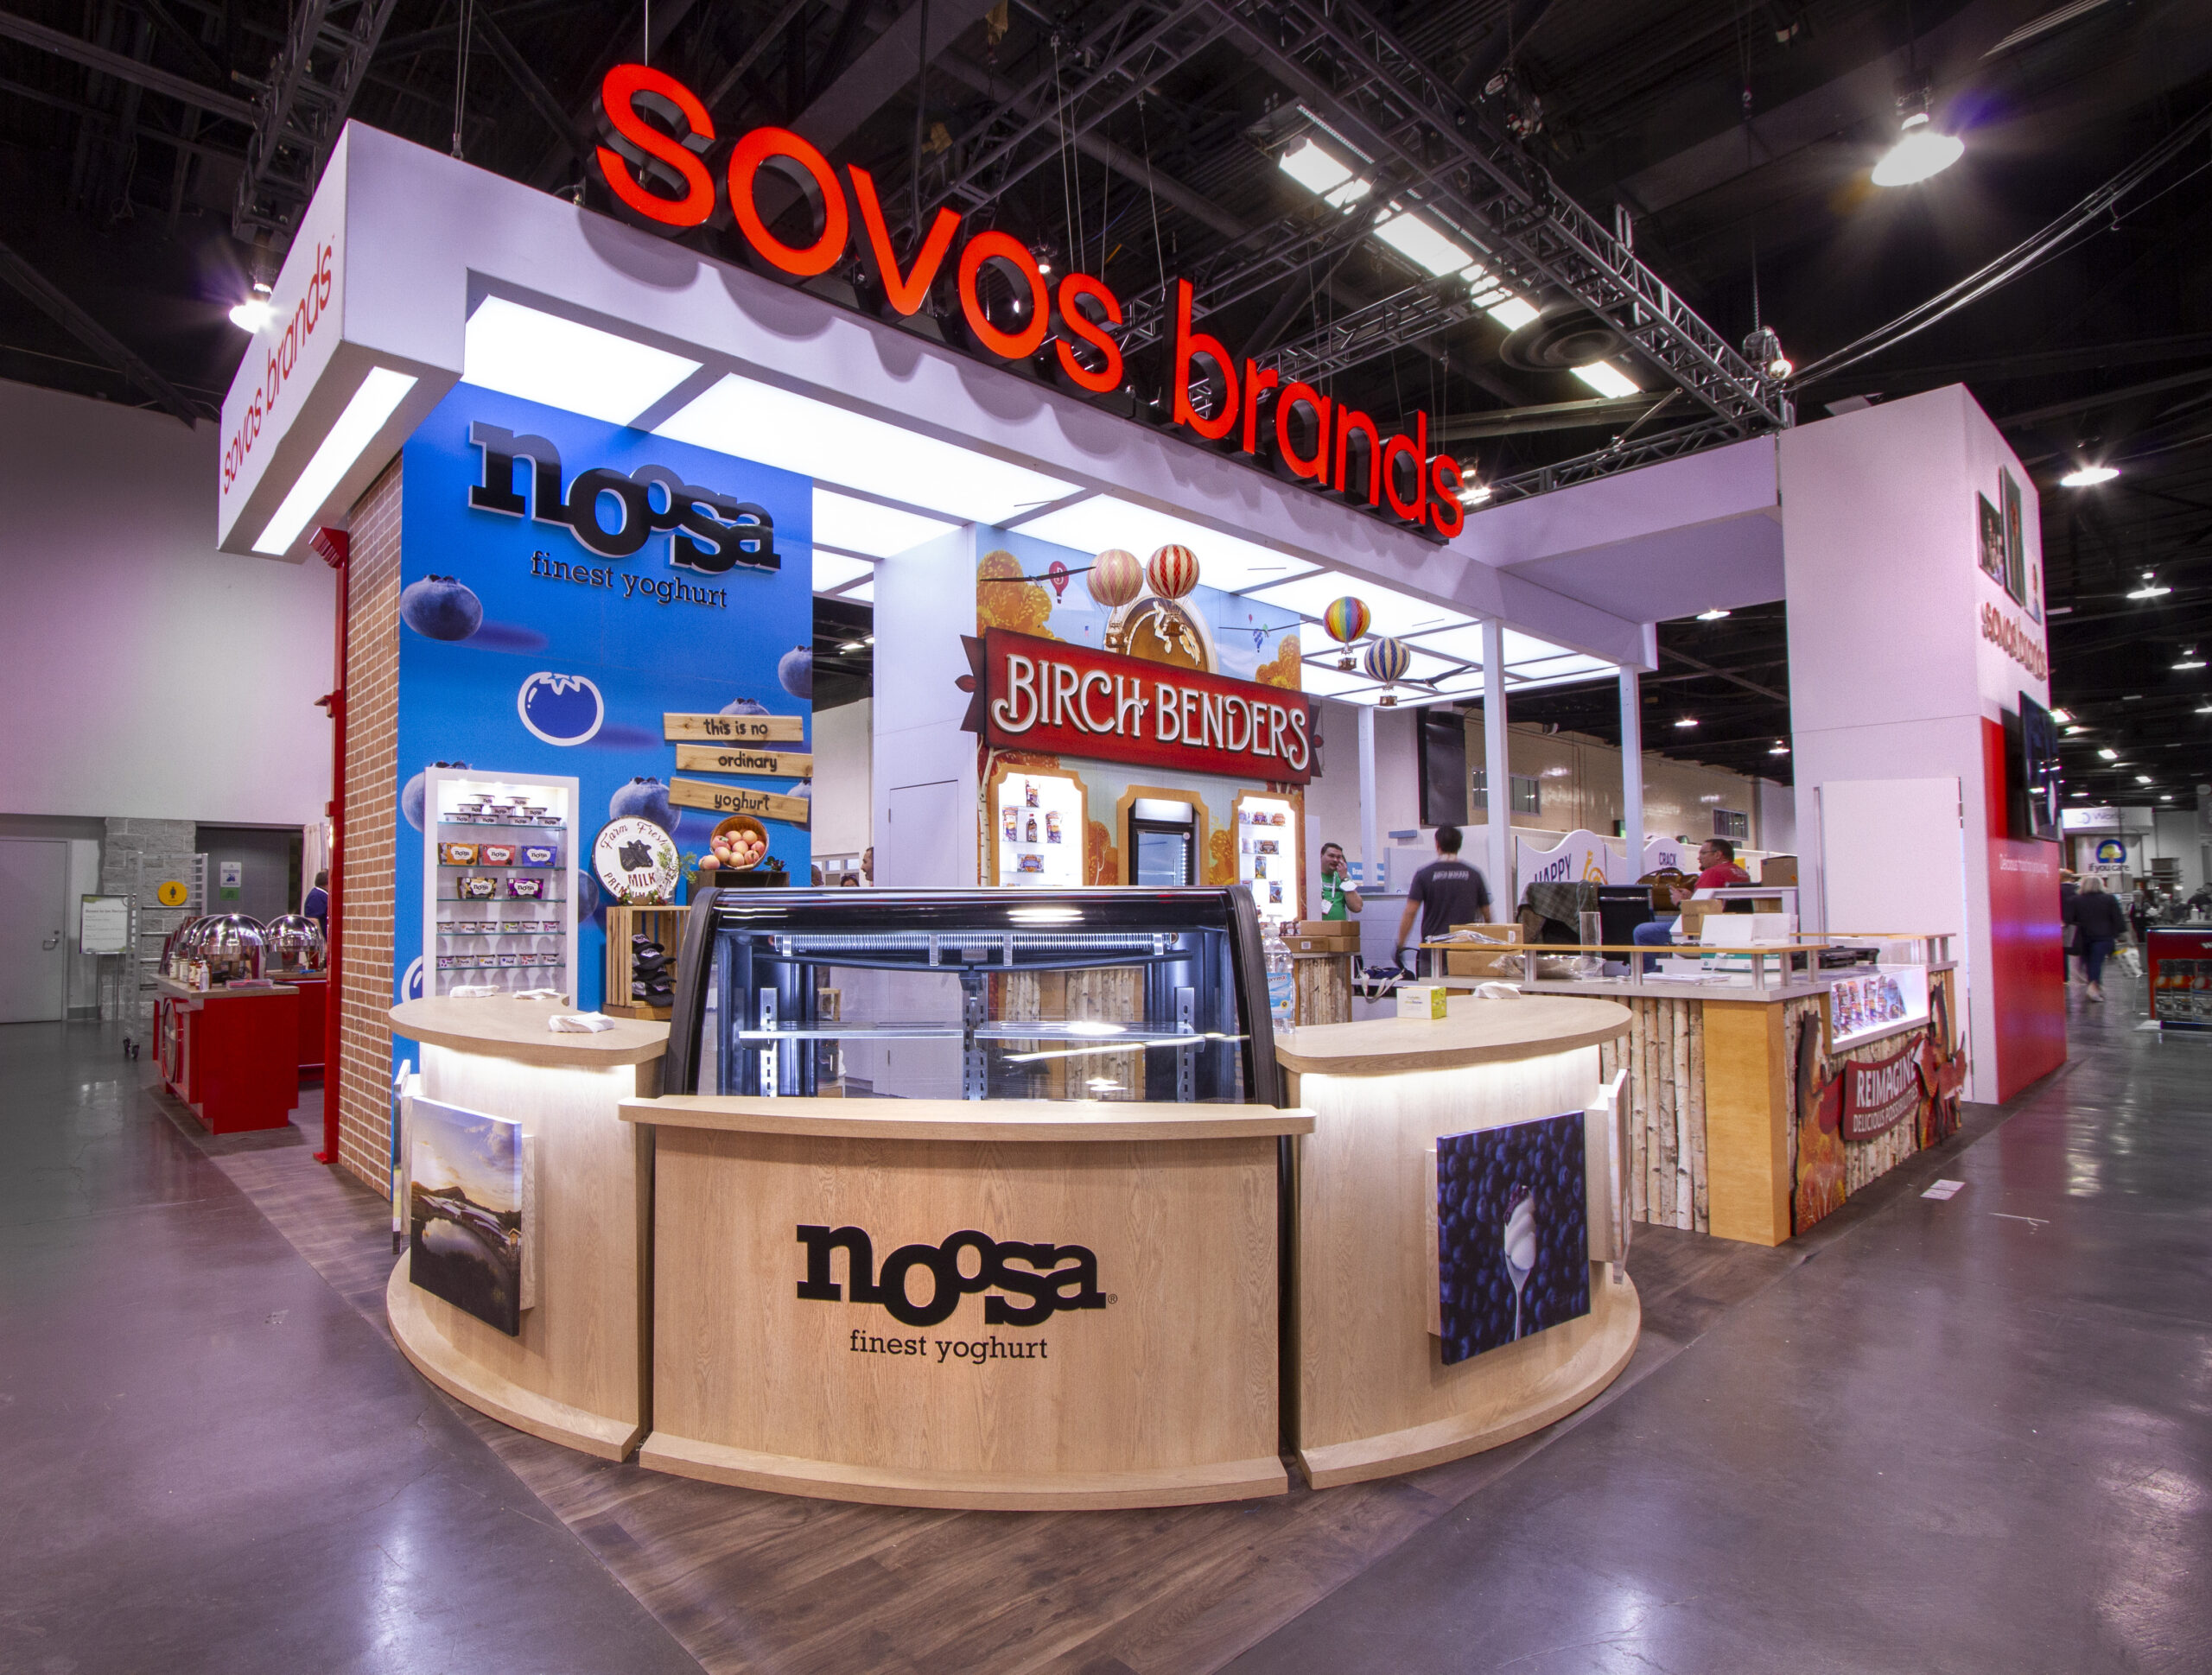 Wide-Angle Left View of Sovos Brands Peninsula Exhibit at Natural Products Expo